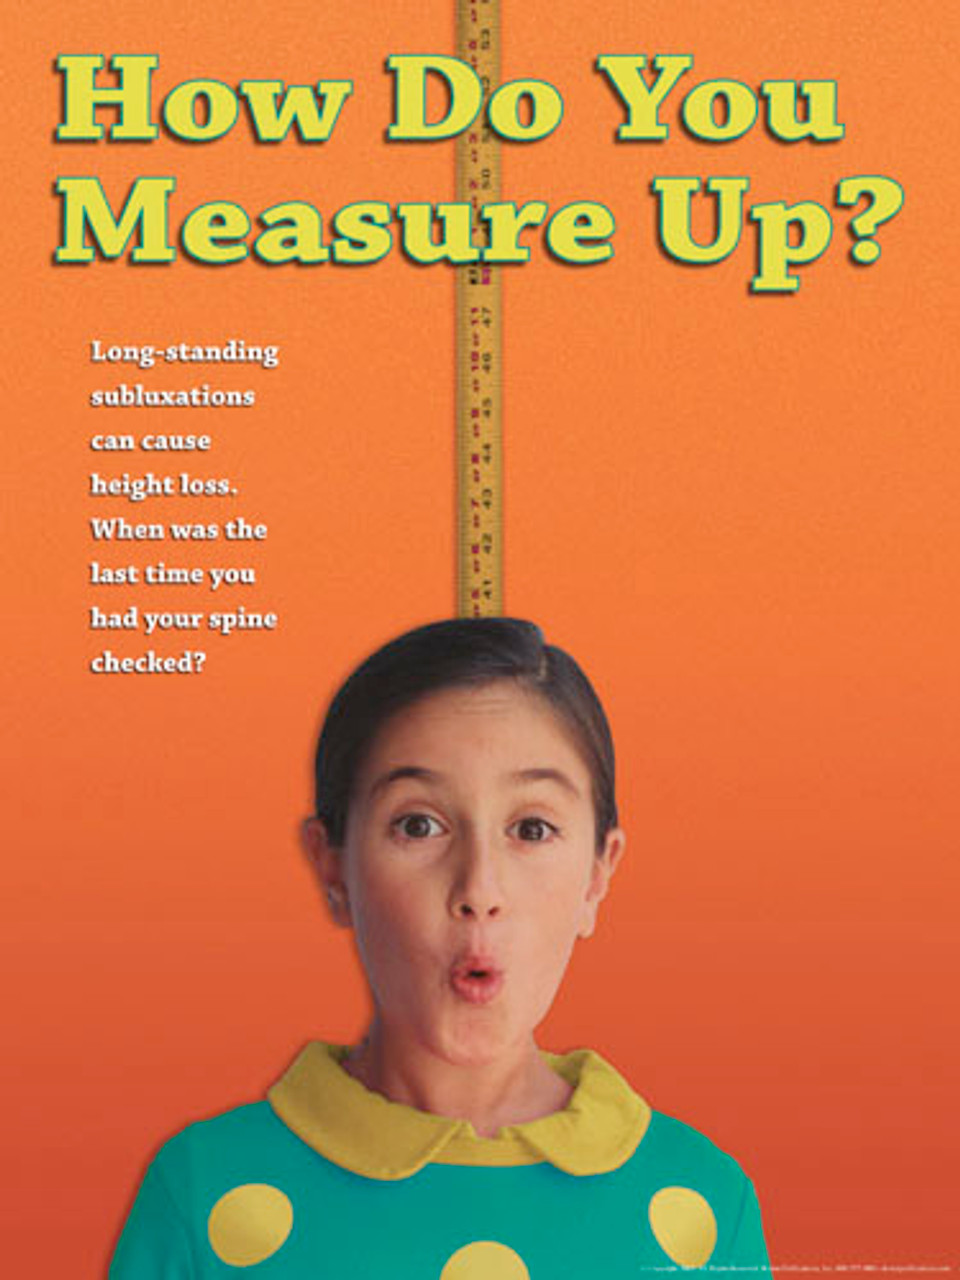 How do You Measure Up Poster